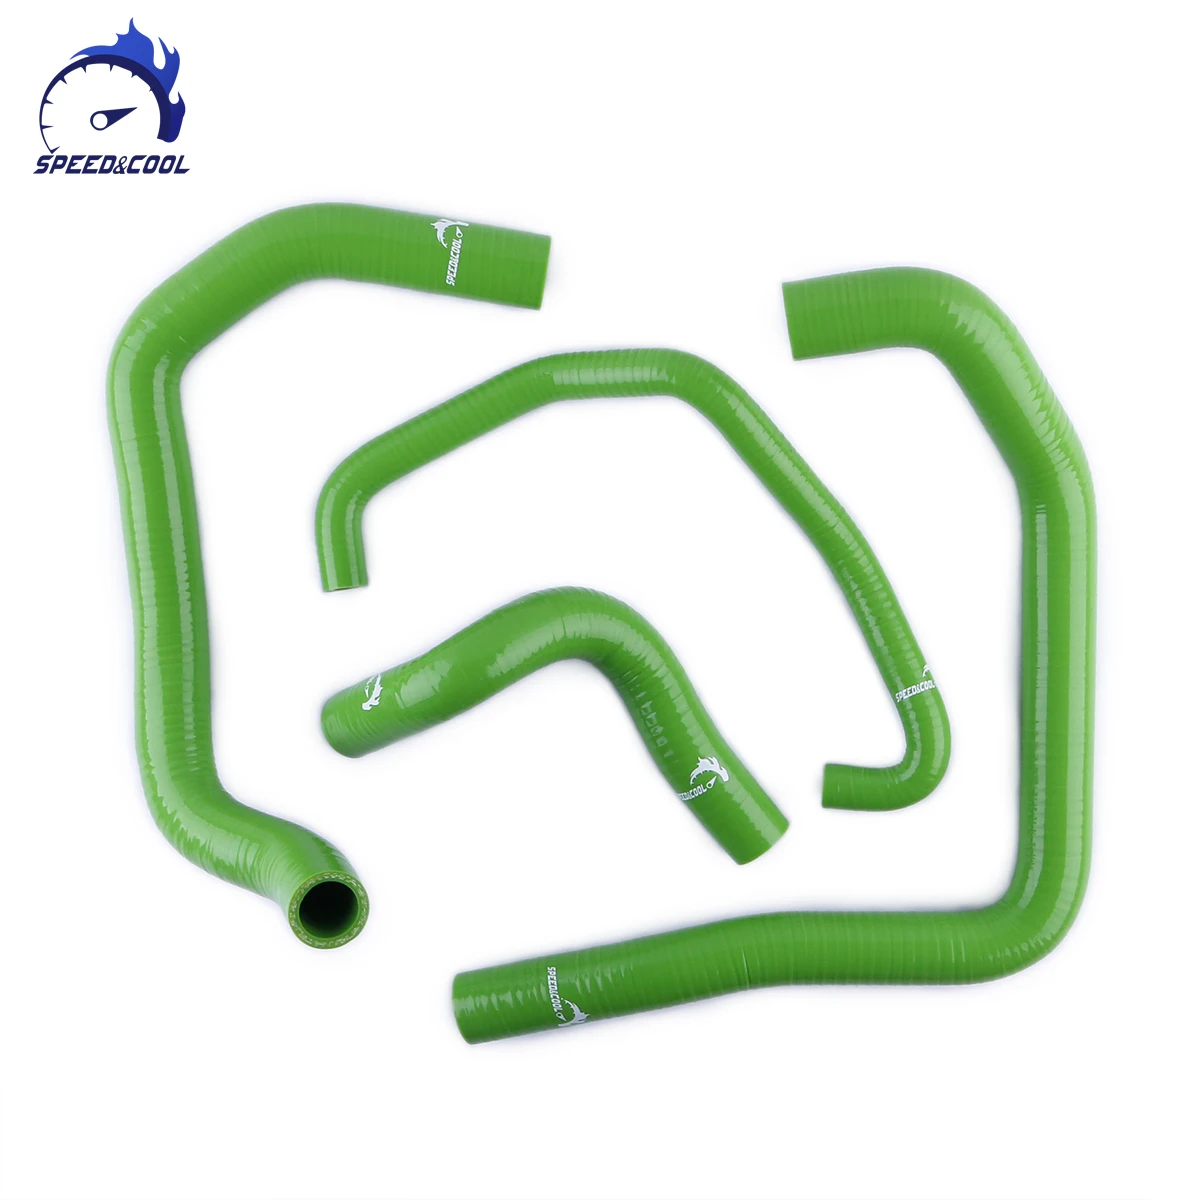 

For 2005-2006 Kawasaki Ninja ZX6R ZX-6R ZX 6R ZX636 ZX 636 Motorcycle Silicone Radiator Coolant Hose Kit